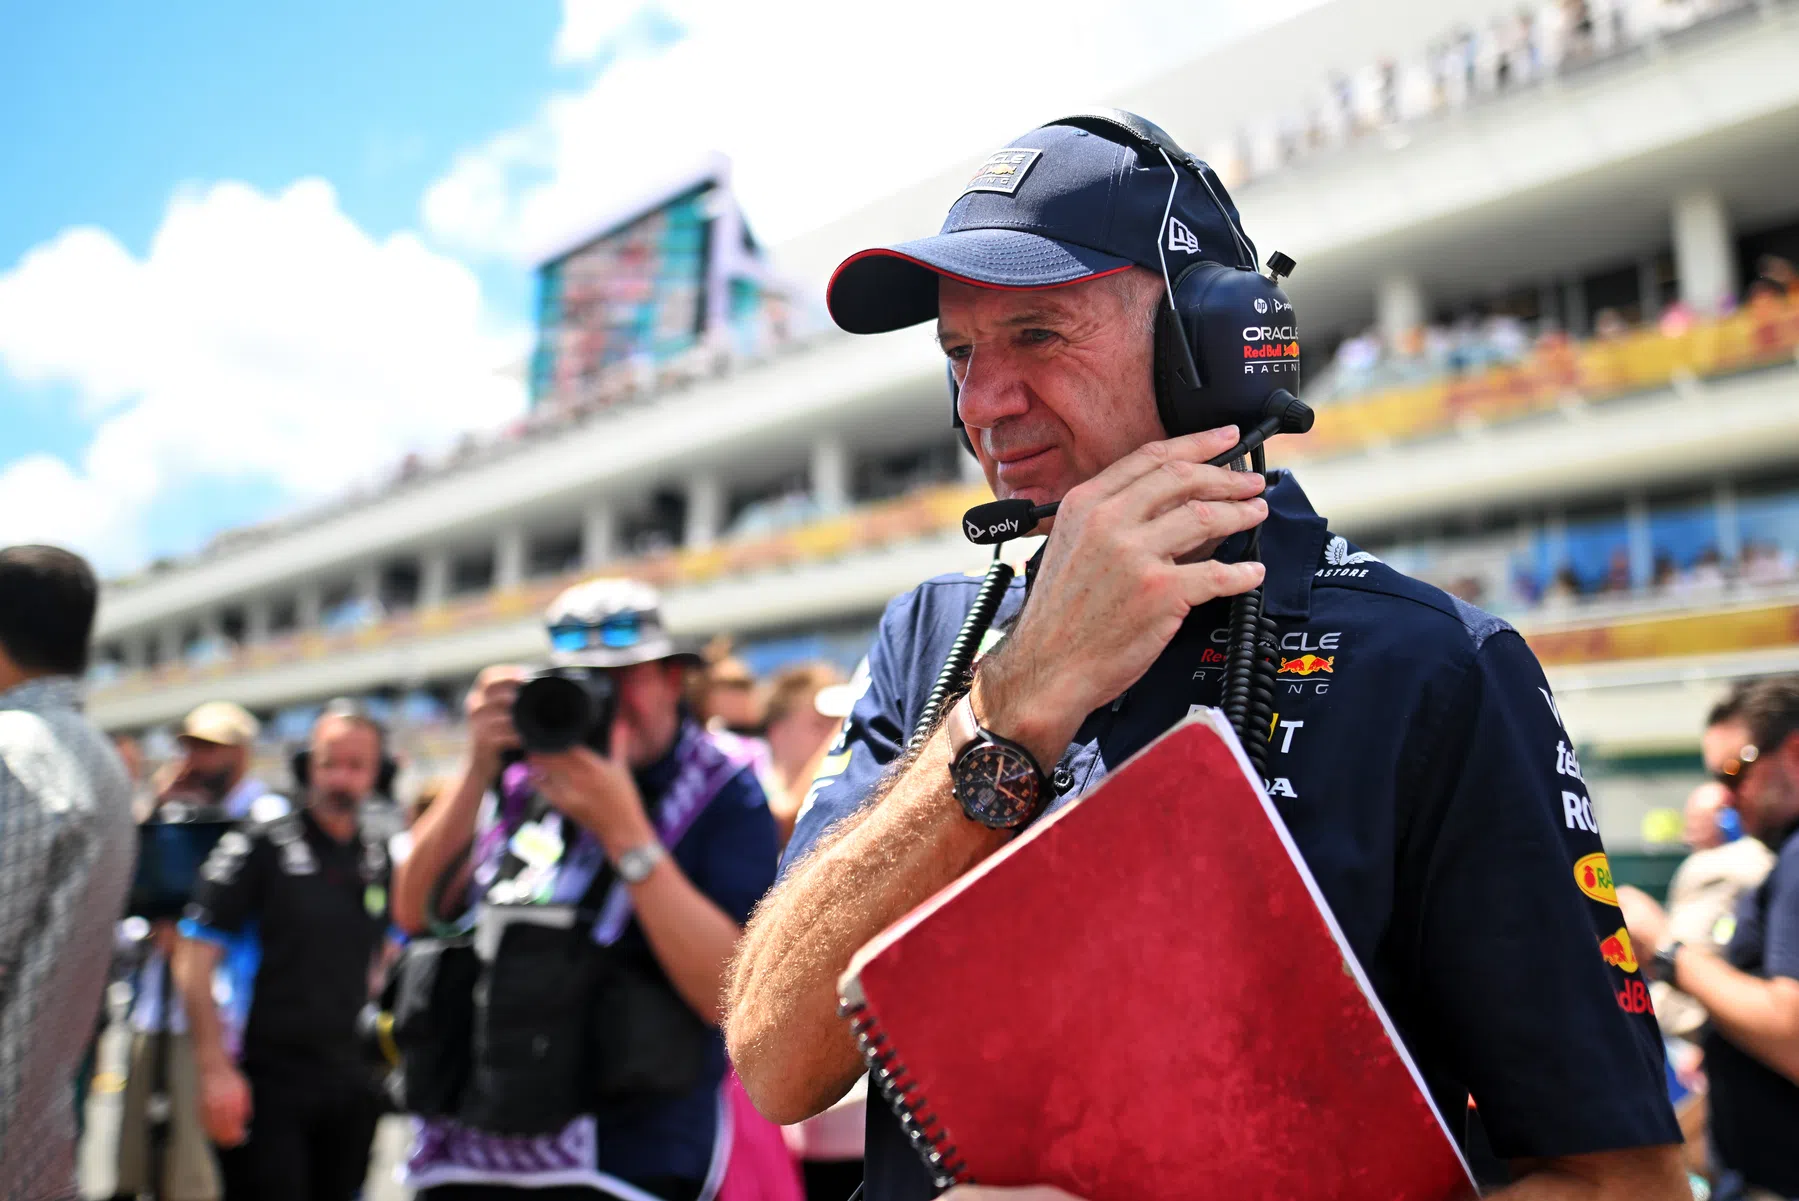 F1 today - Mercedes want Adrian Newey and Perez under pressure